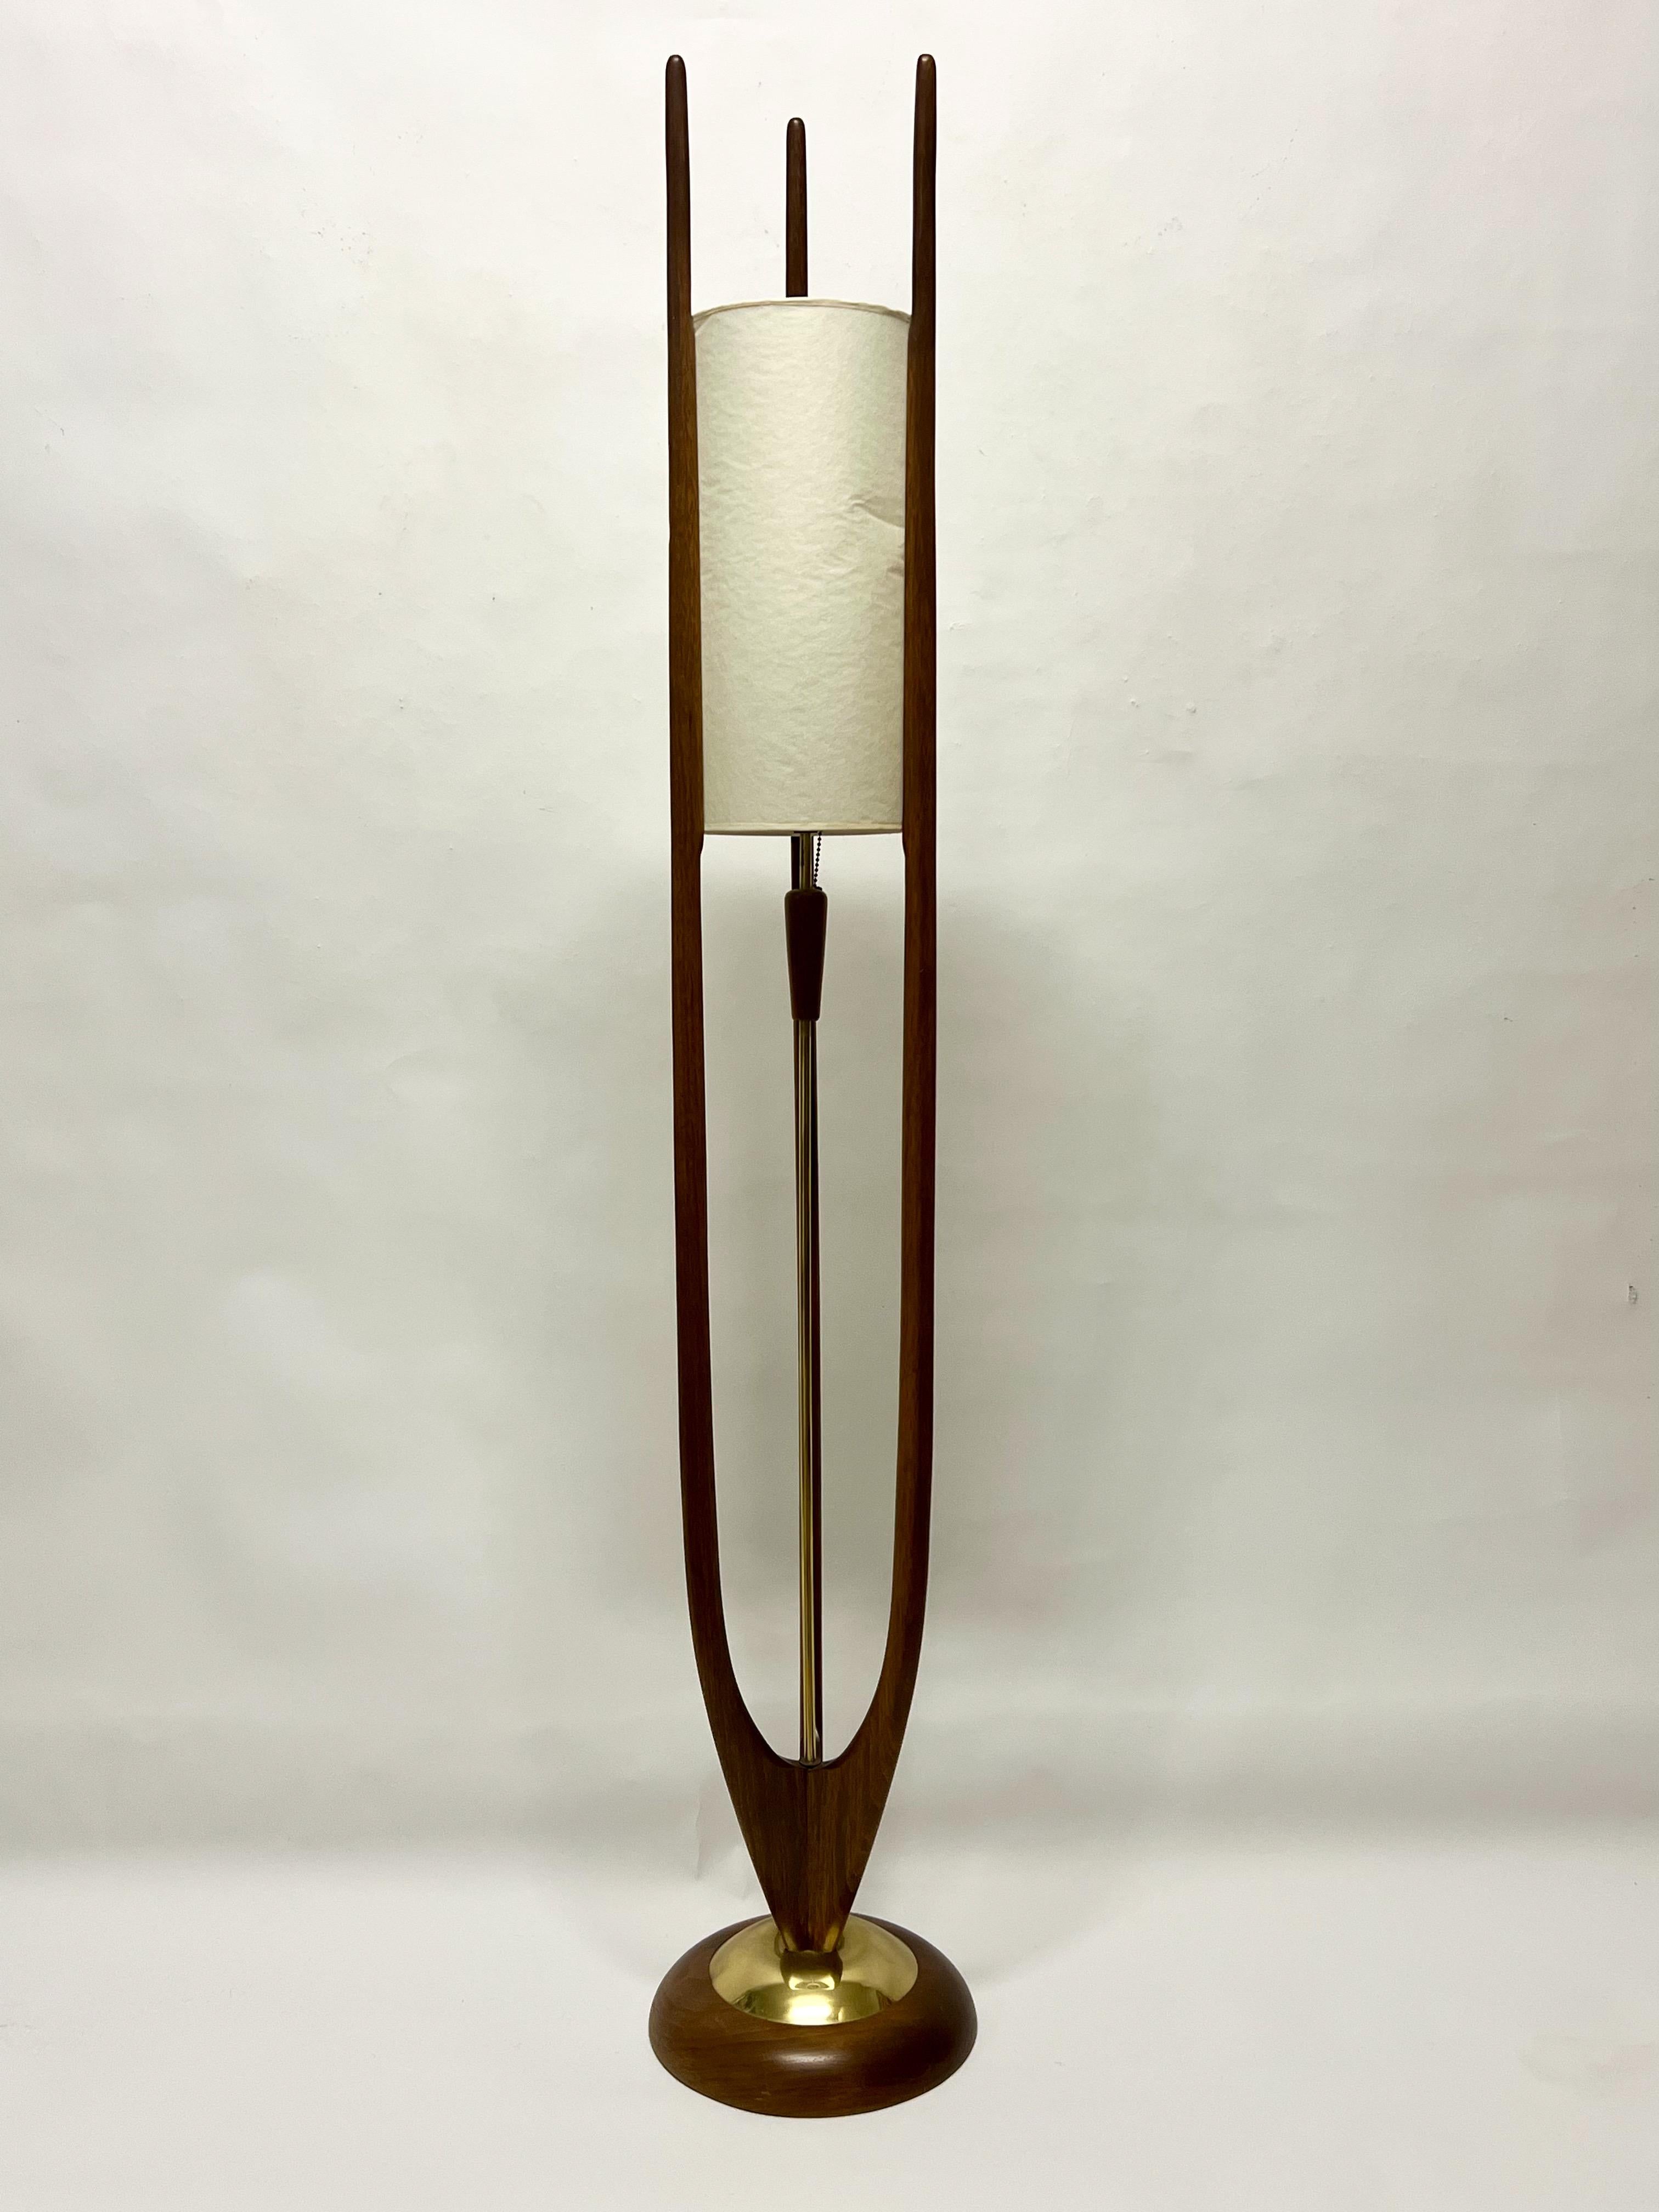 Fantastic rare floor lamp by American designer, John Keal c1960s. All original condition, wonderful patina, with original shade. Typically the original outer shades are missing from these lamps. It can be used with or without the outer shade, as